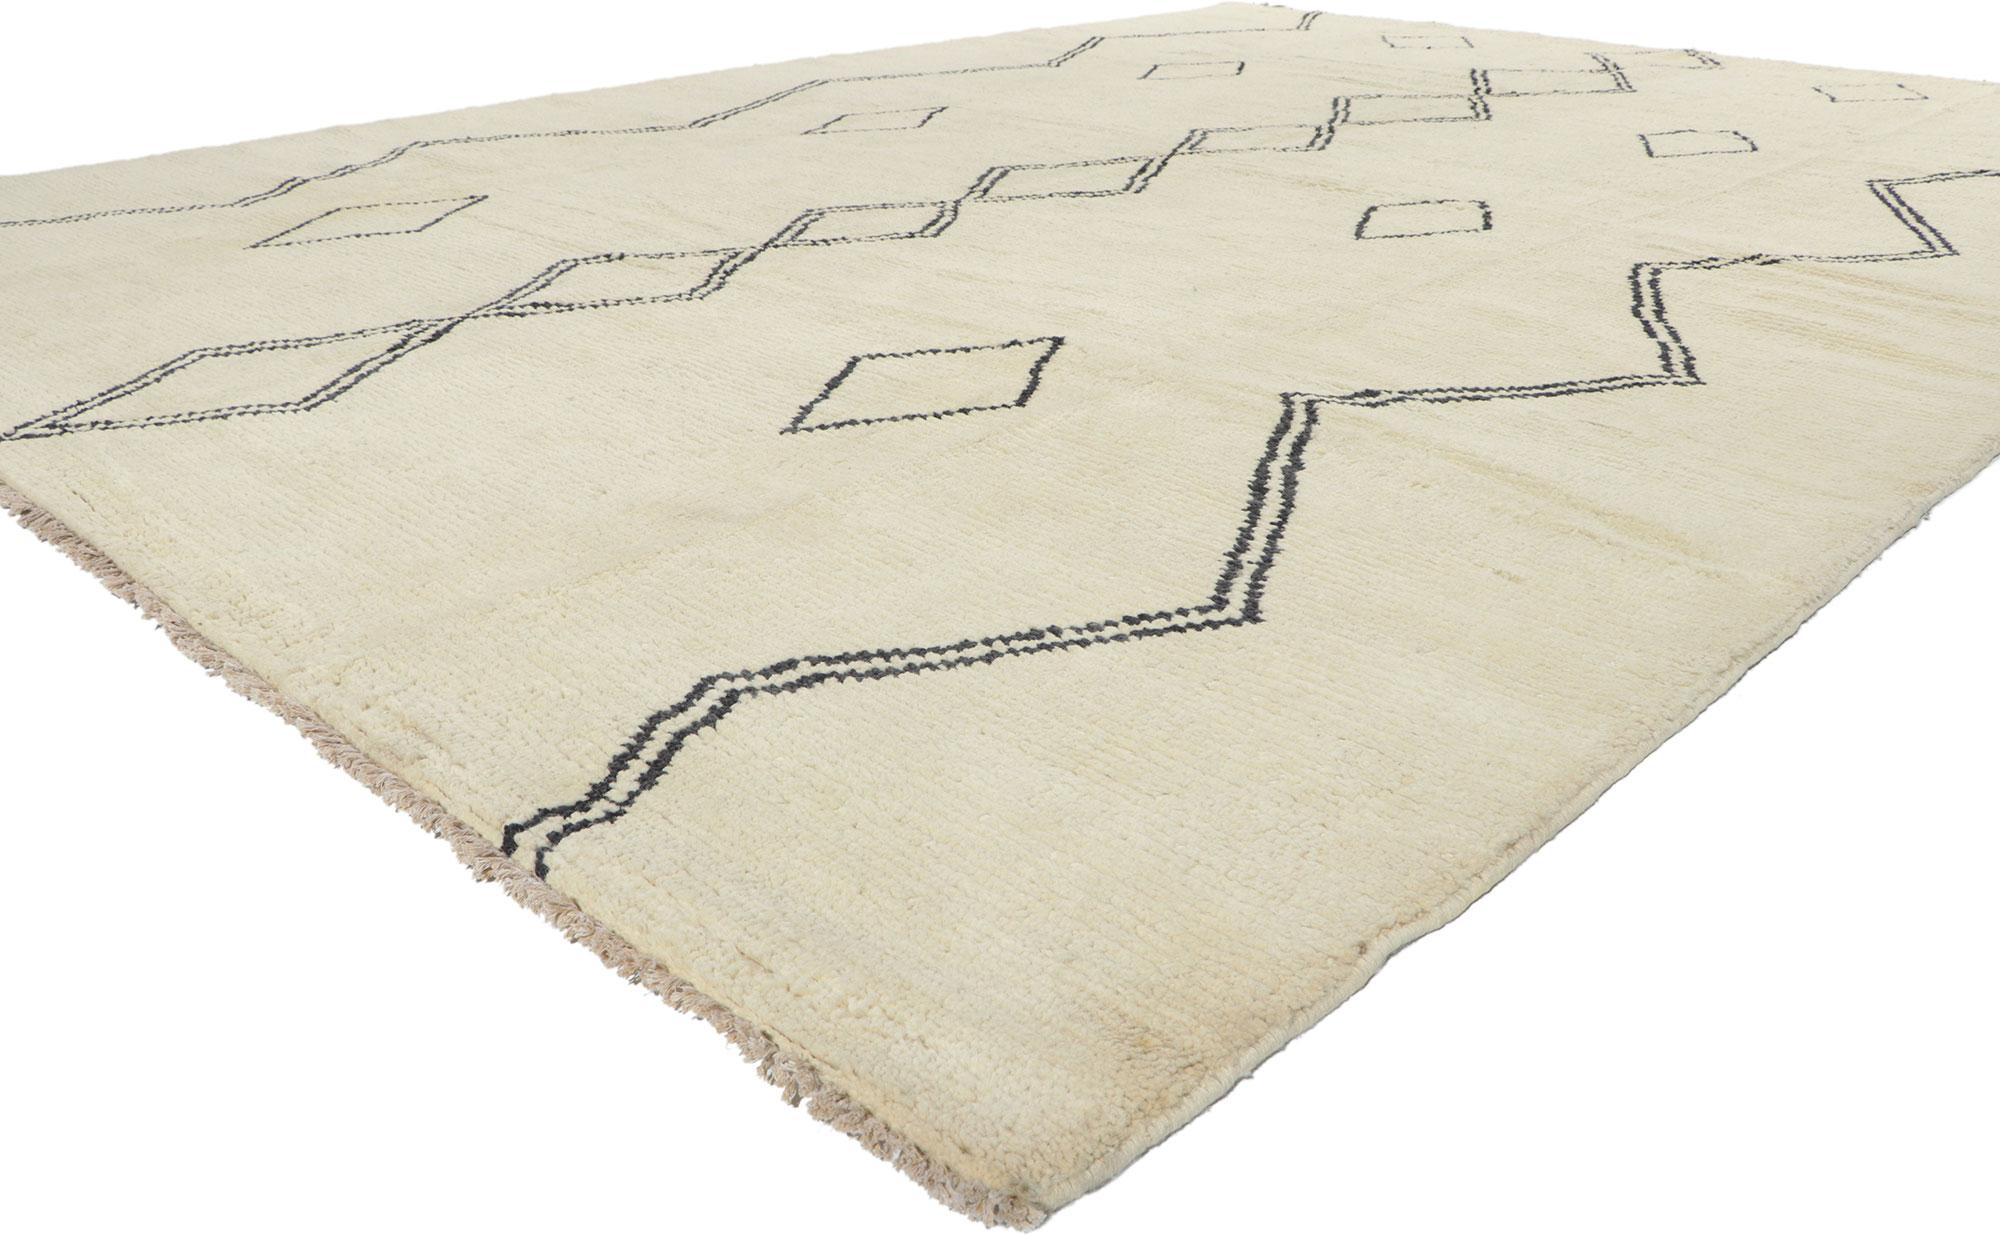 ​80700 New Contemporary Moroccan Area Rug with Tribal Style 09'06 x 13'00. ​With its simplicity, incredible detail and texture, this hand knotted wool contemporary Moroccan rug is a captivating vision of woven beauty. The abrashed beige field